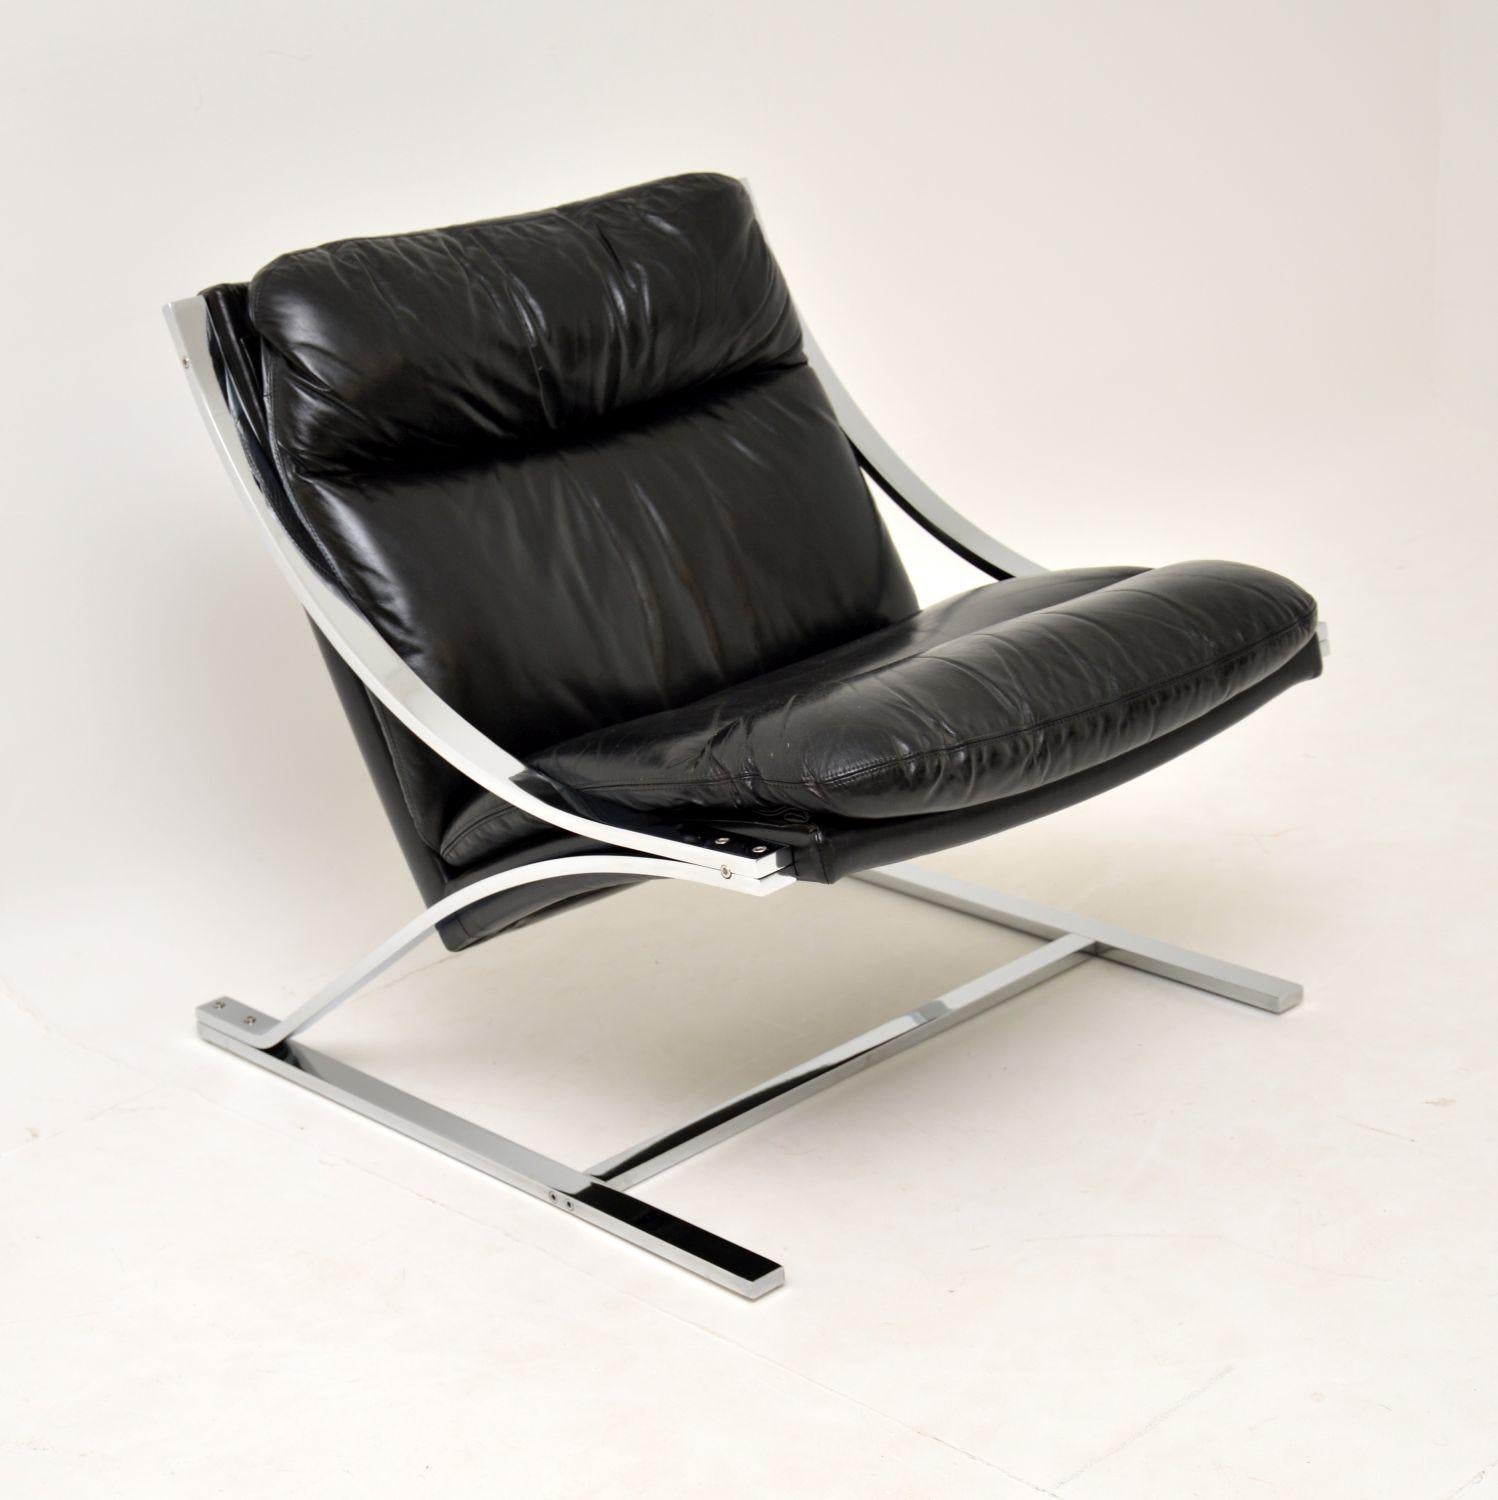 Swiss 1960's Vintage Leather & Chrome Zeta Chair by Paul Tuttle for Strassle